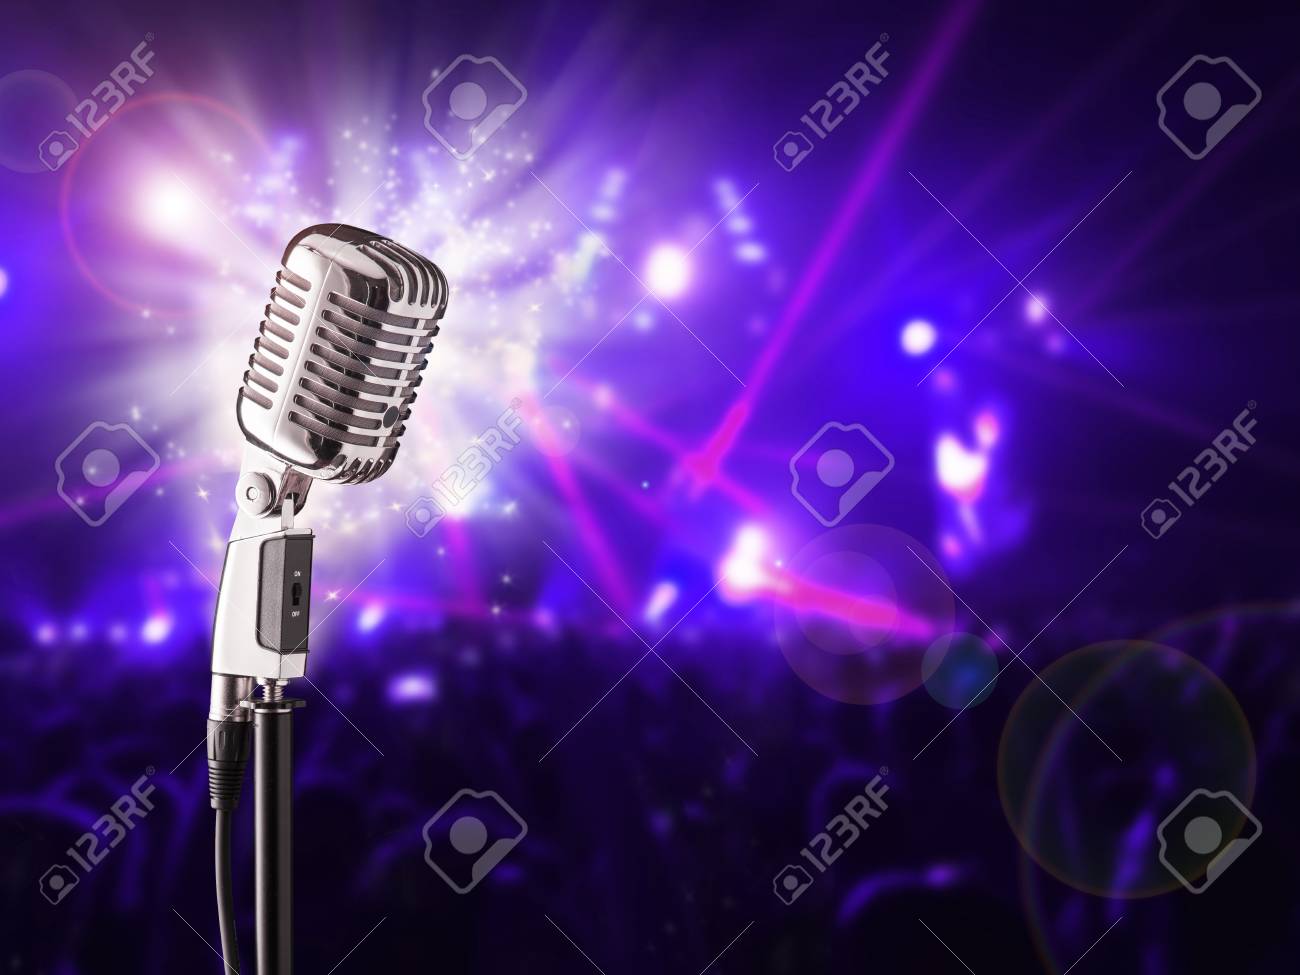 Retro Microphone Ready For Singer Blur Crowd Of People On